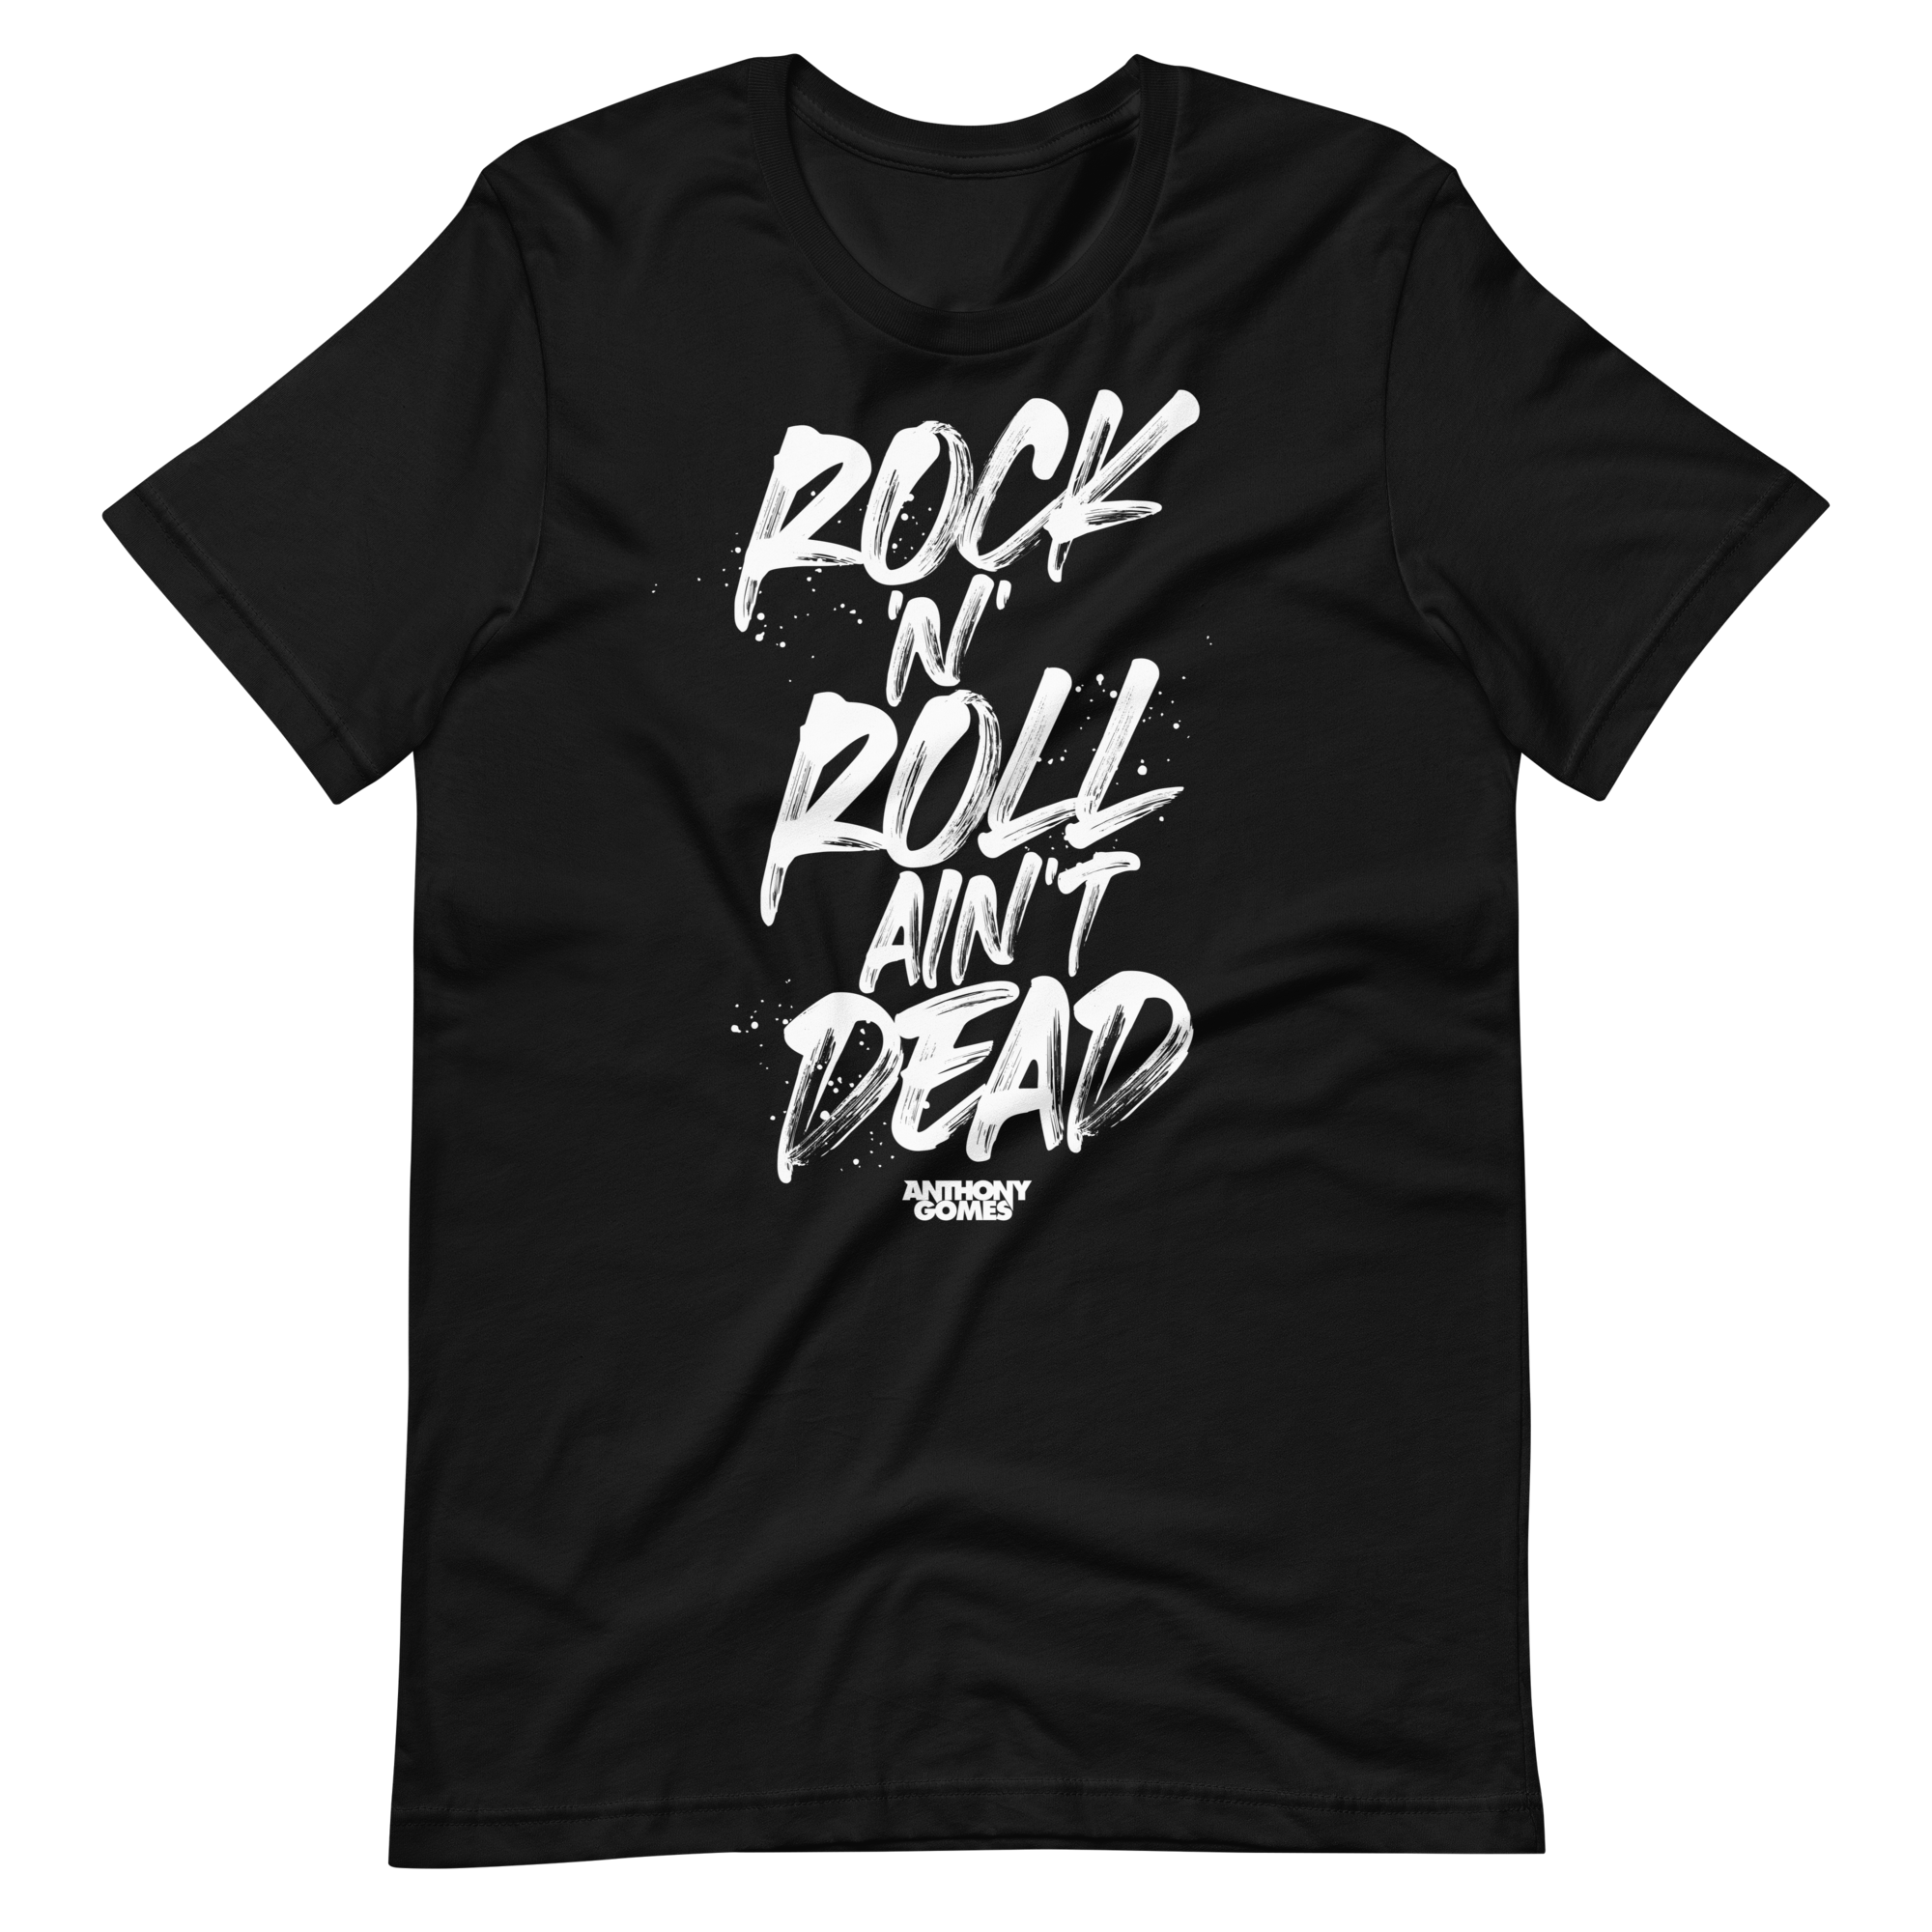 Rock 'N' Roll Ain't Dead Unisex T-Shirt - Available in 10 Colors (S-5XL)